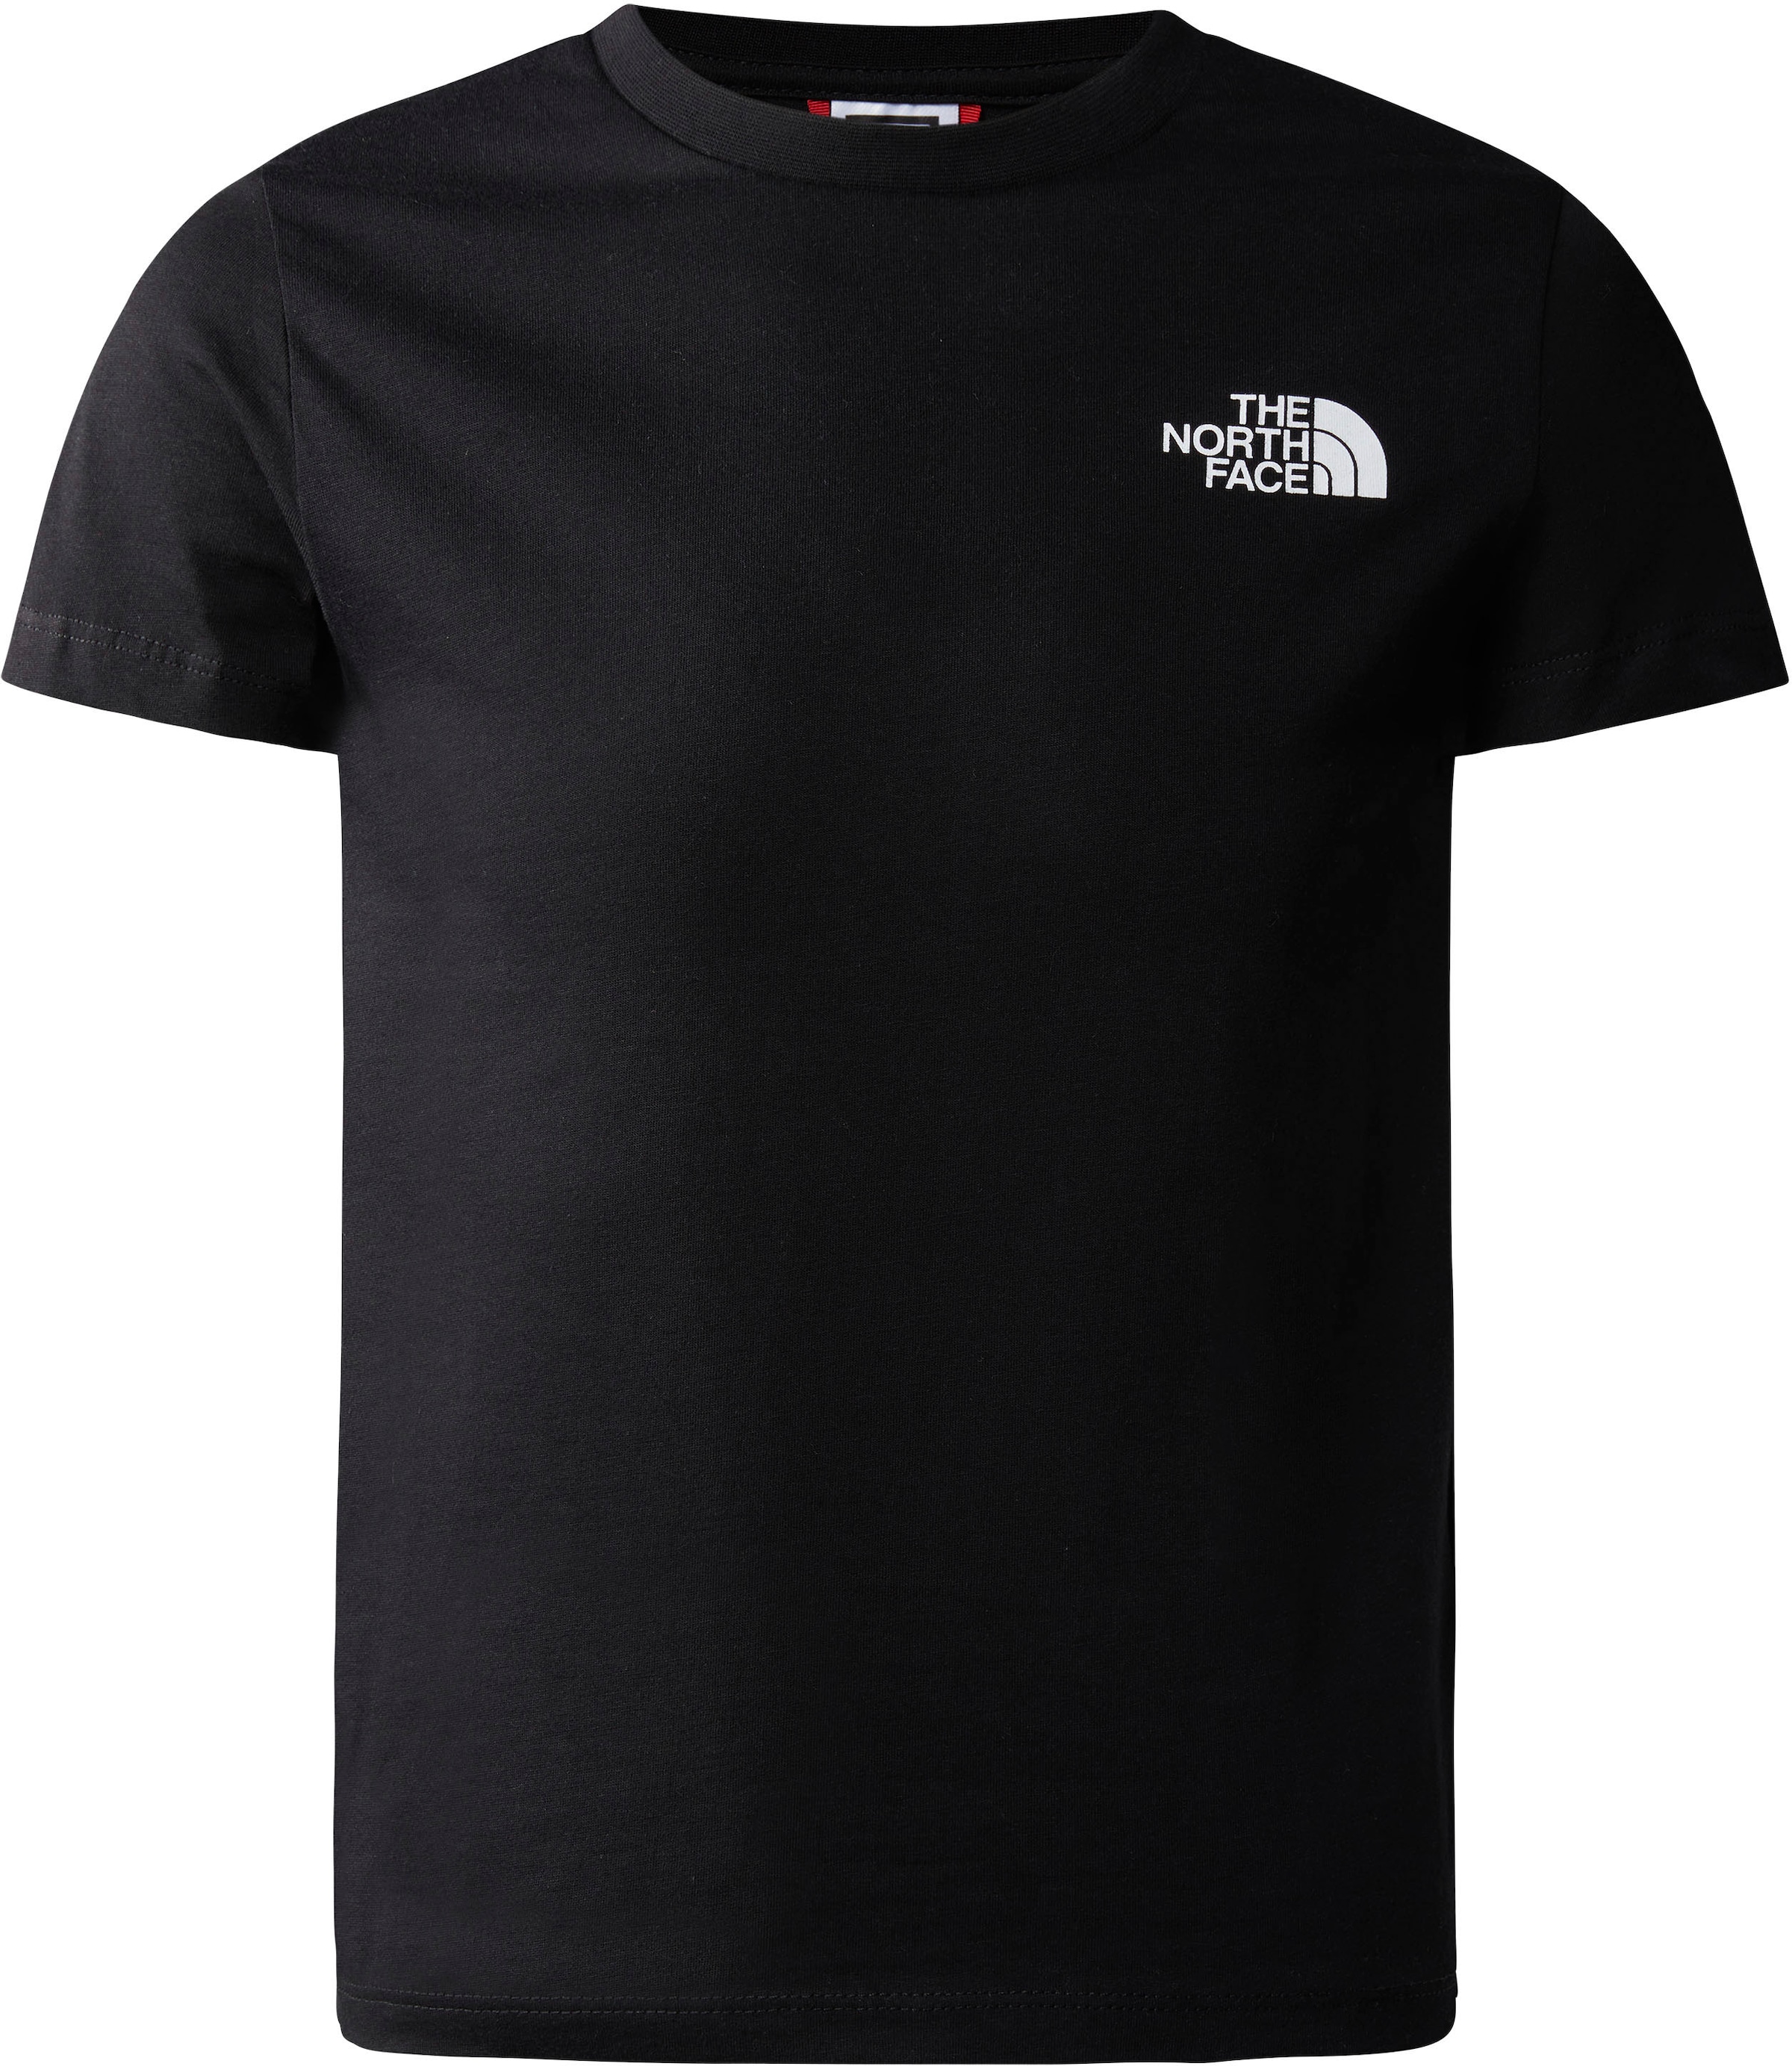 Subjectief afbetalen Productief The North Face T-Shirt »TEEN S/S SIMPLE DOME TEE«, für Kinder online bei  OTTO